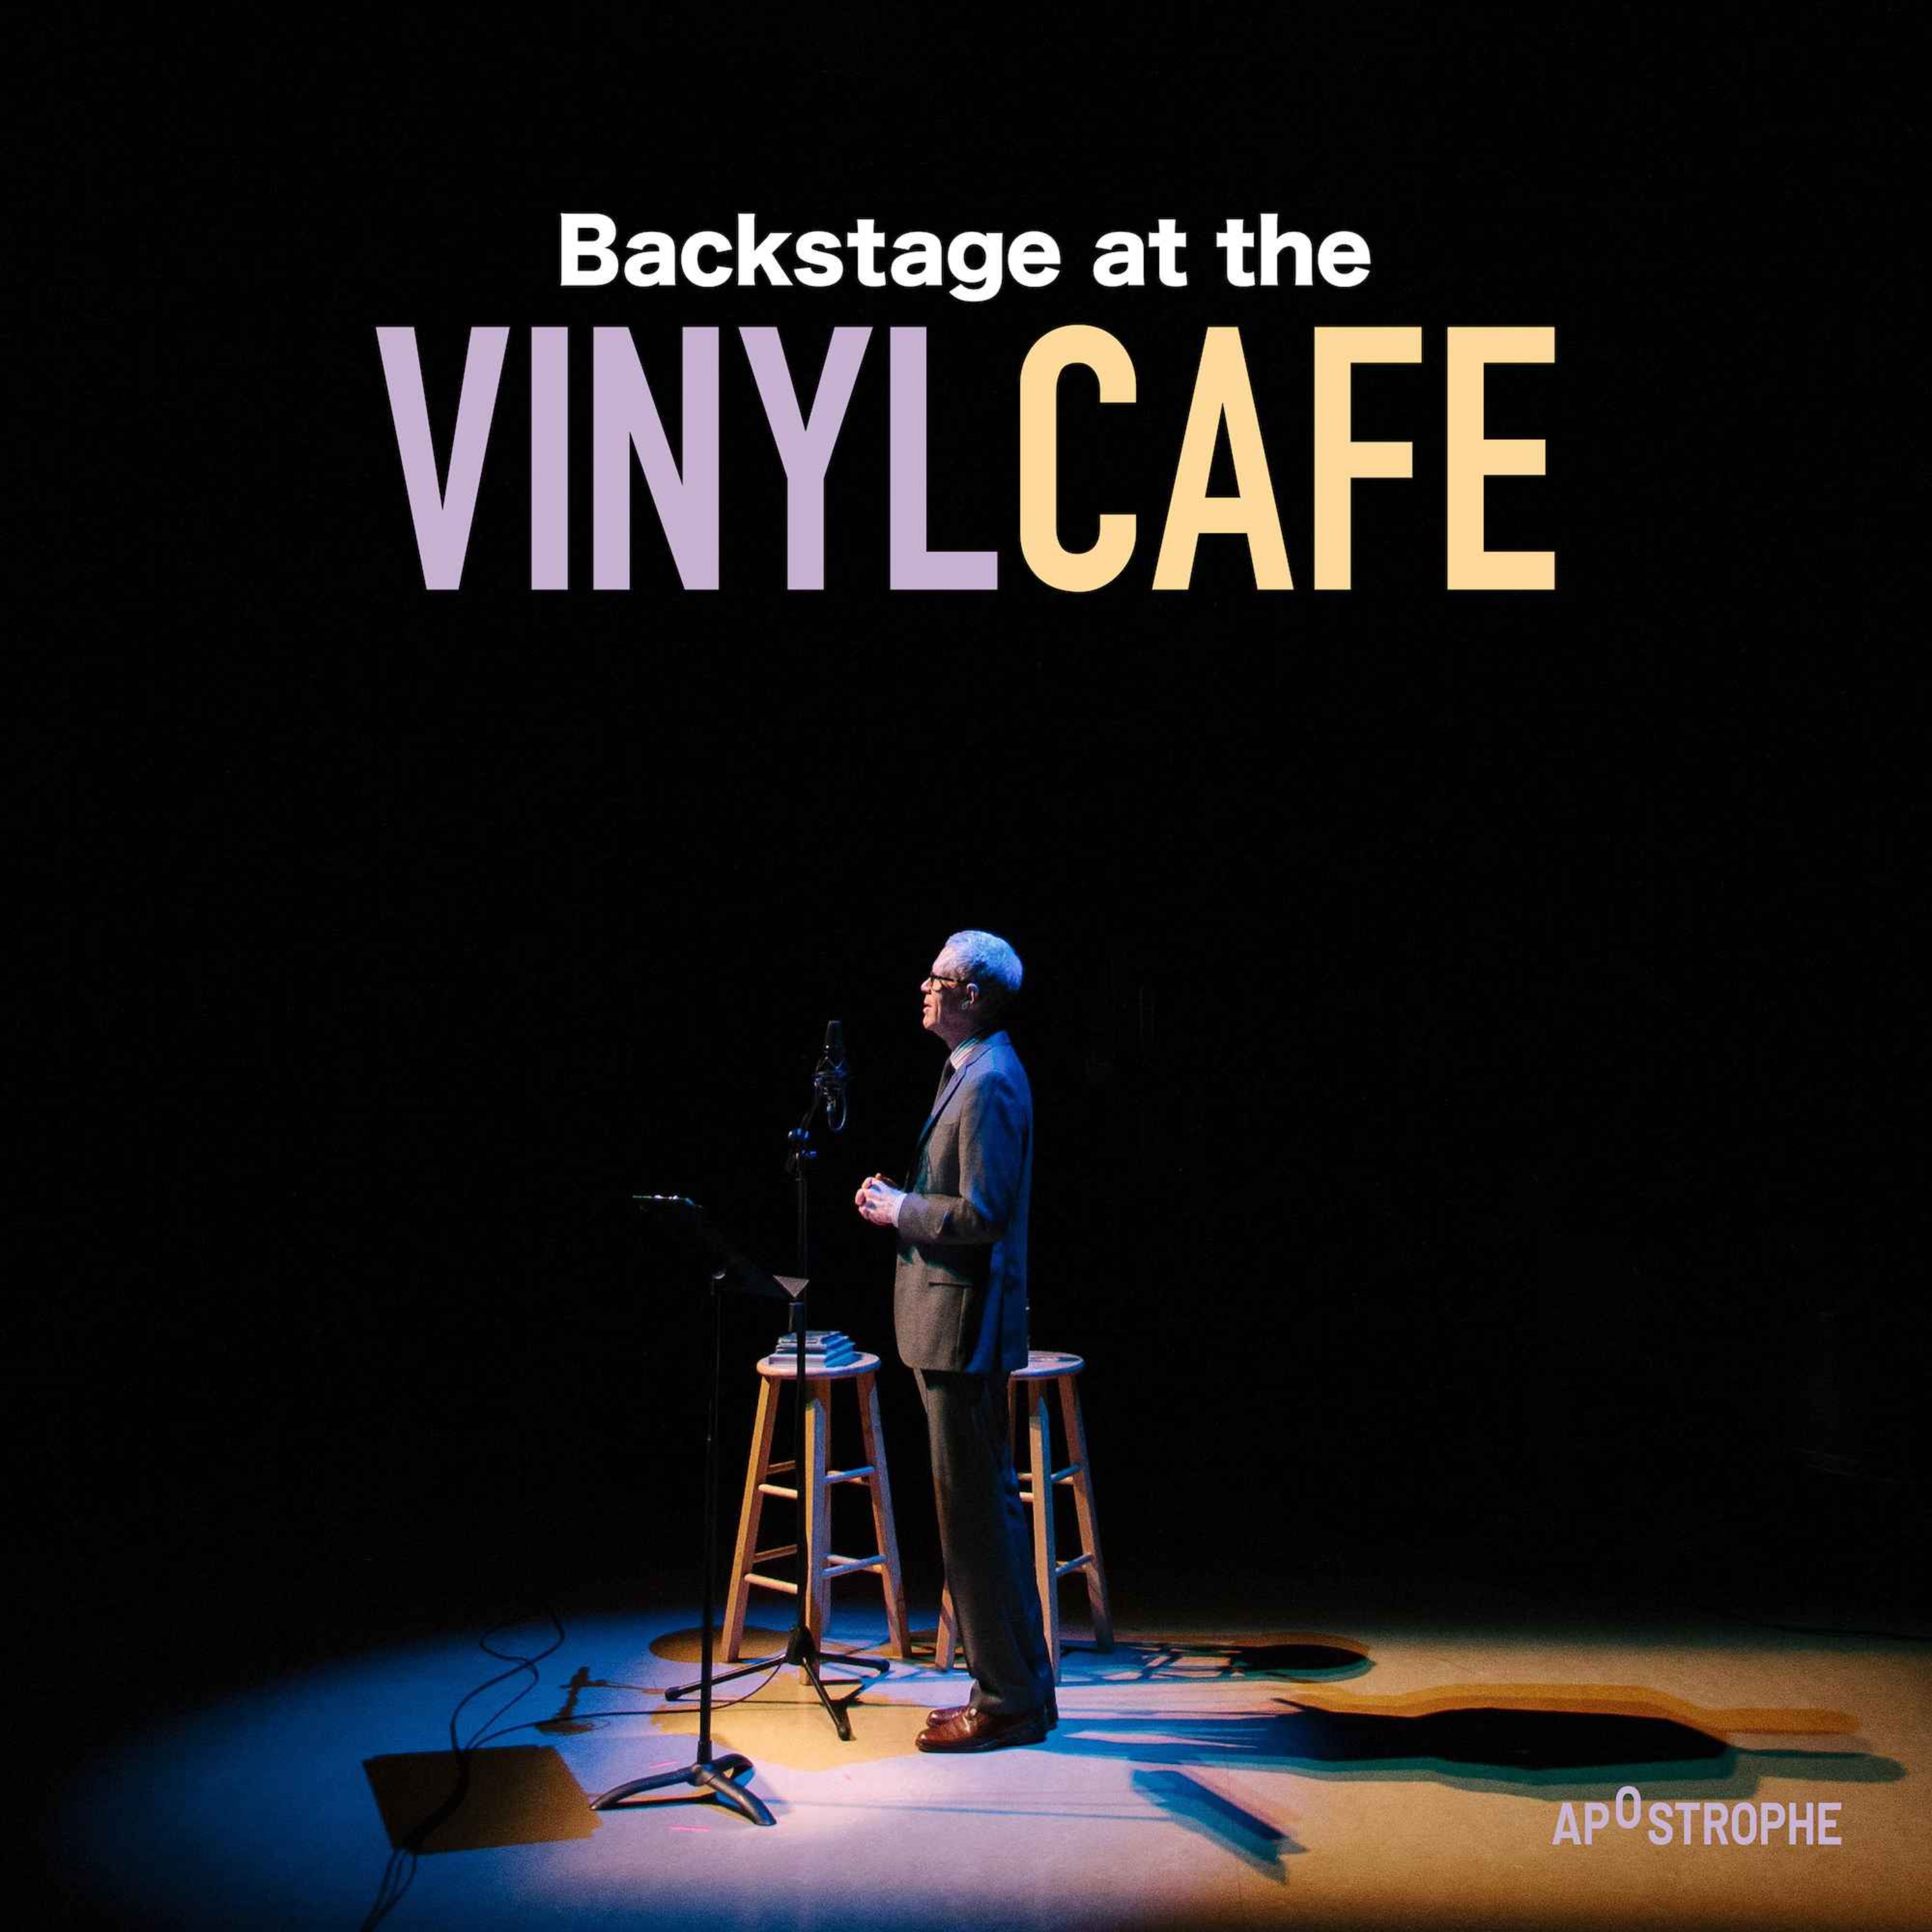 Introducing Backstage at the Vinyl Cafe